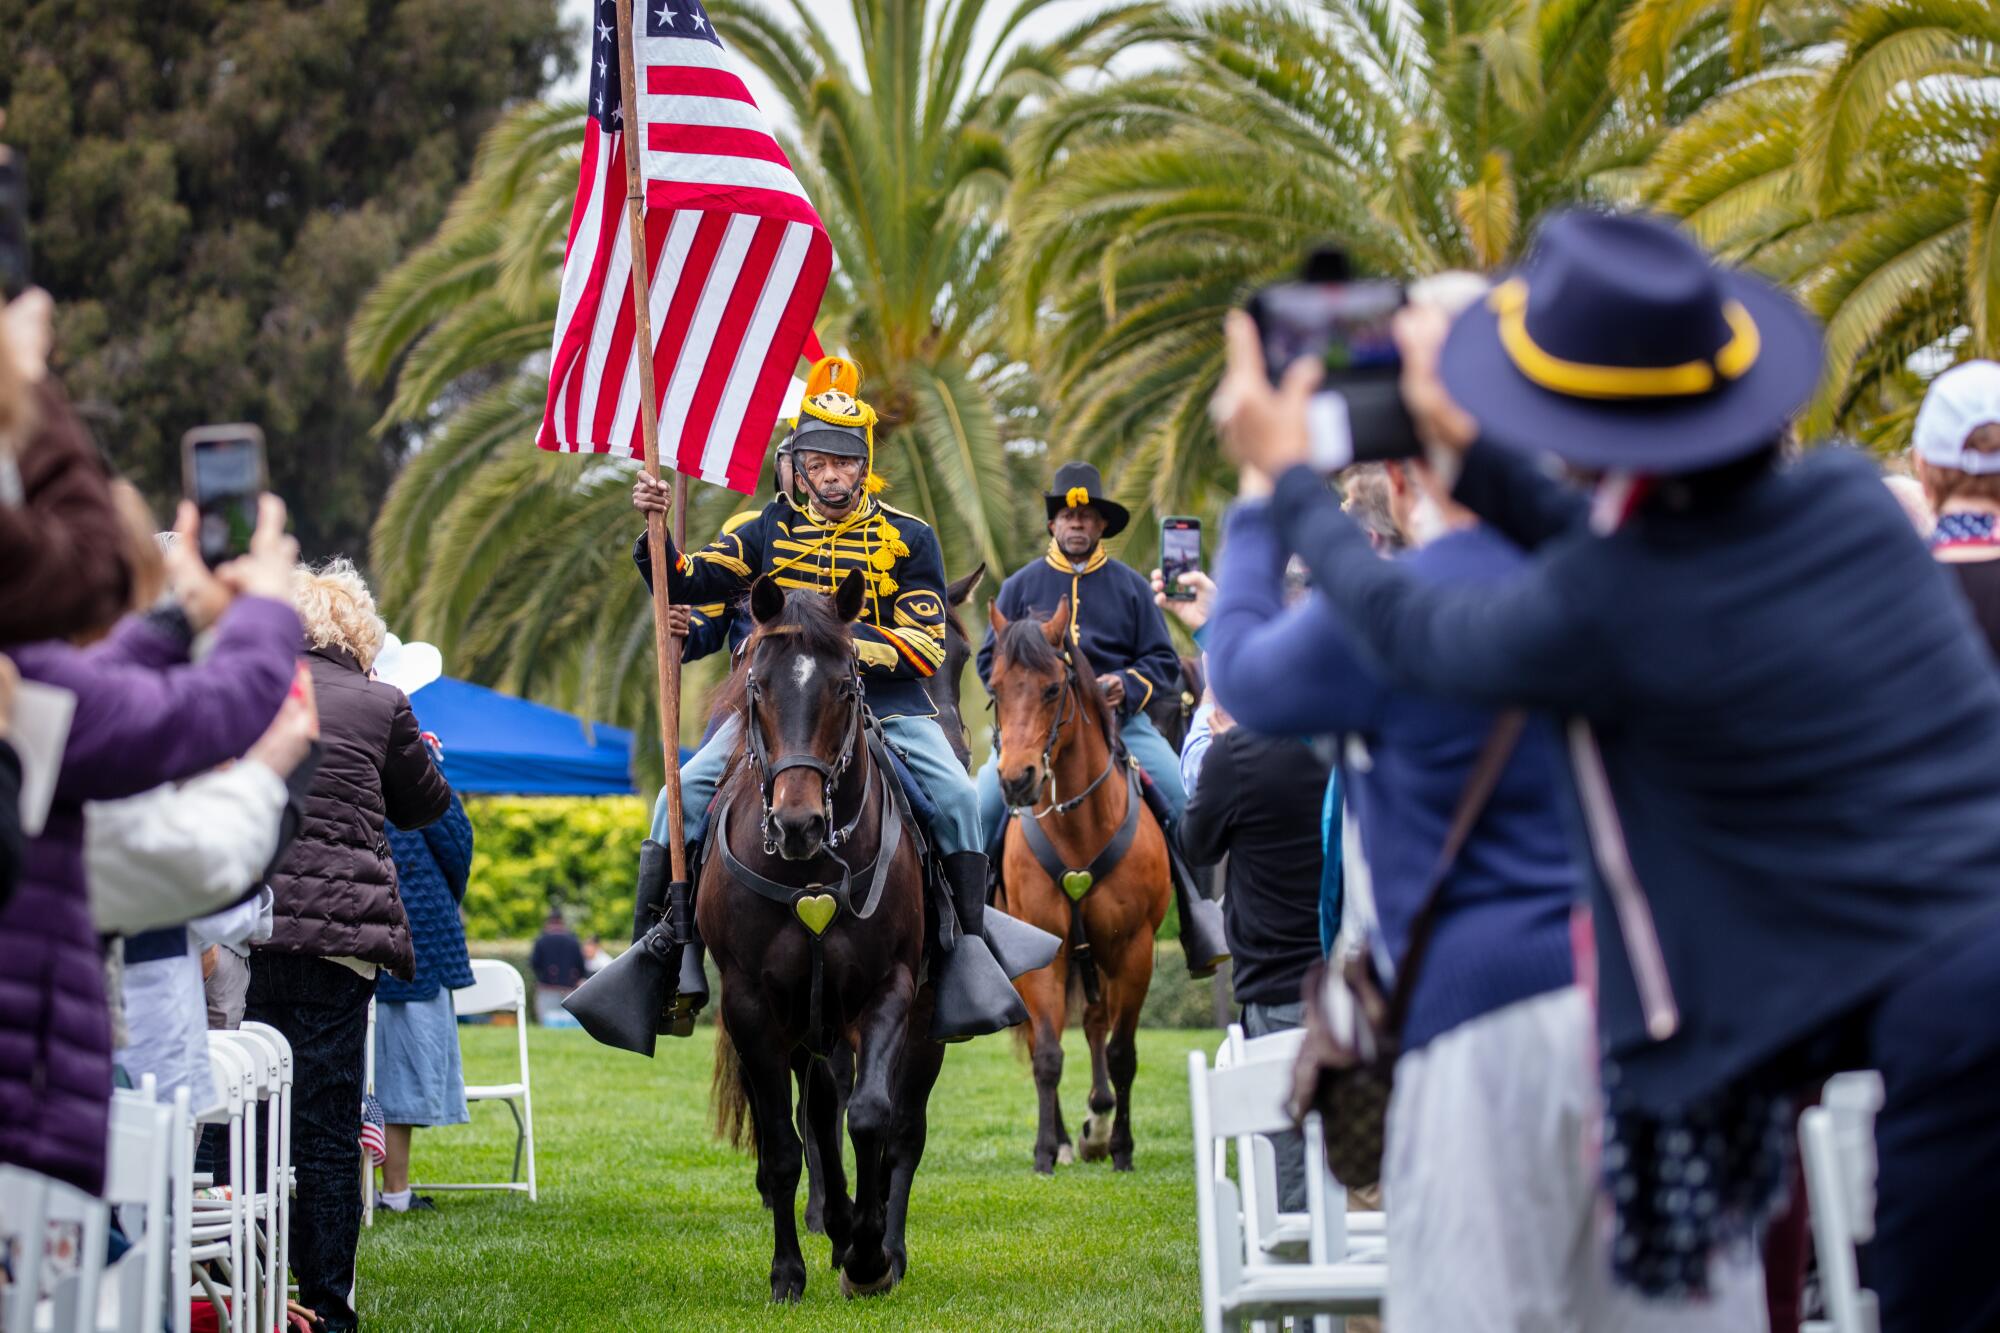 Mounted Buffalo Soldiers deliver the presentation of colors, before the start of a Memorial Day ceremony 